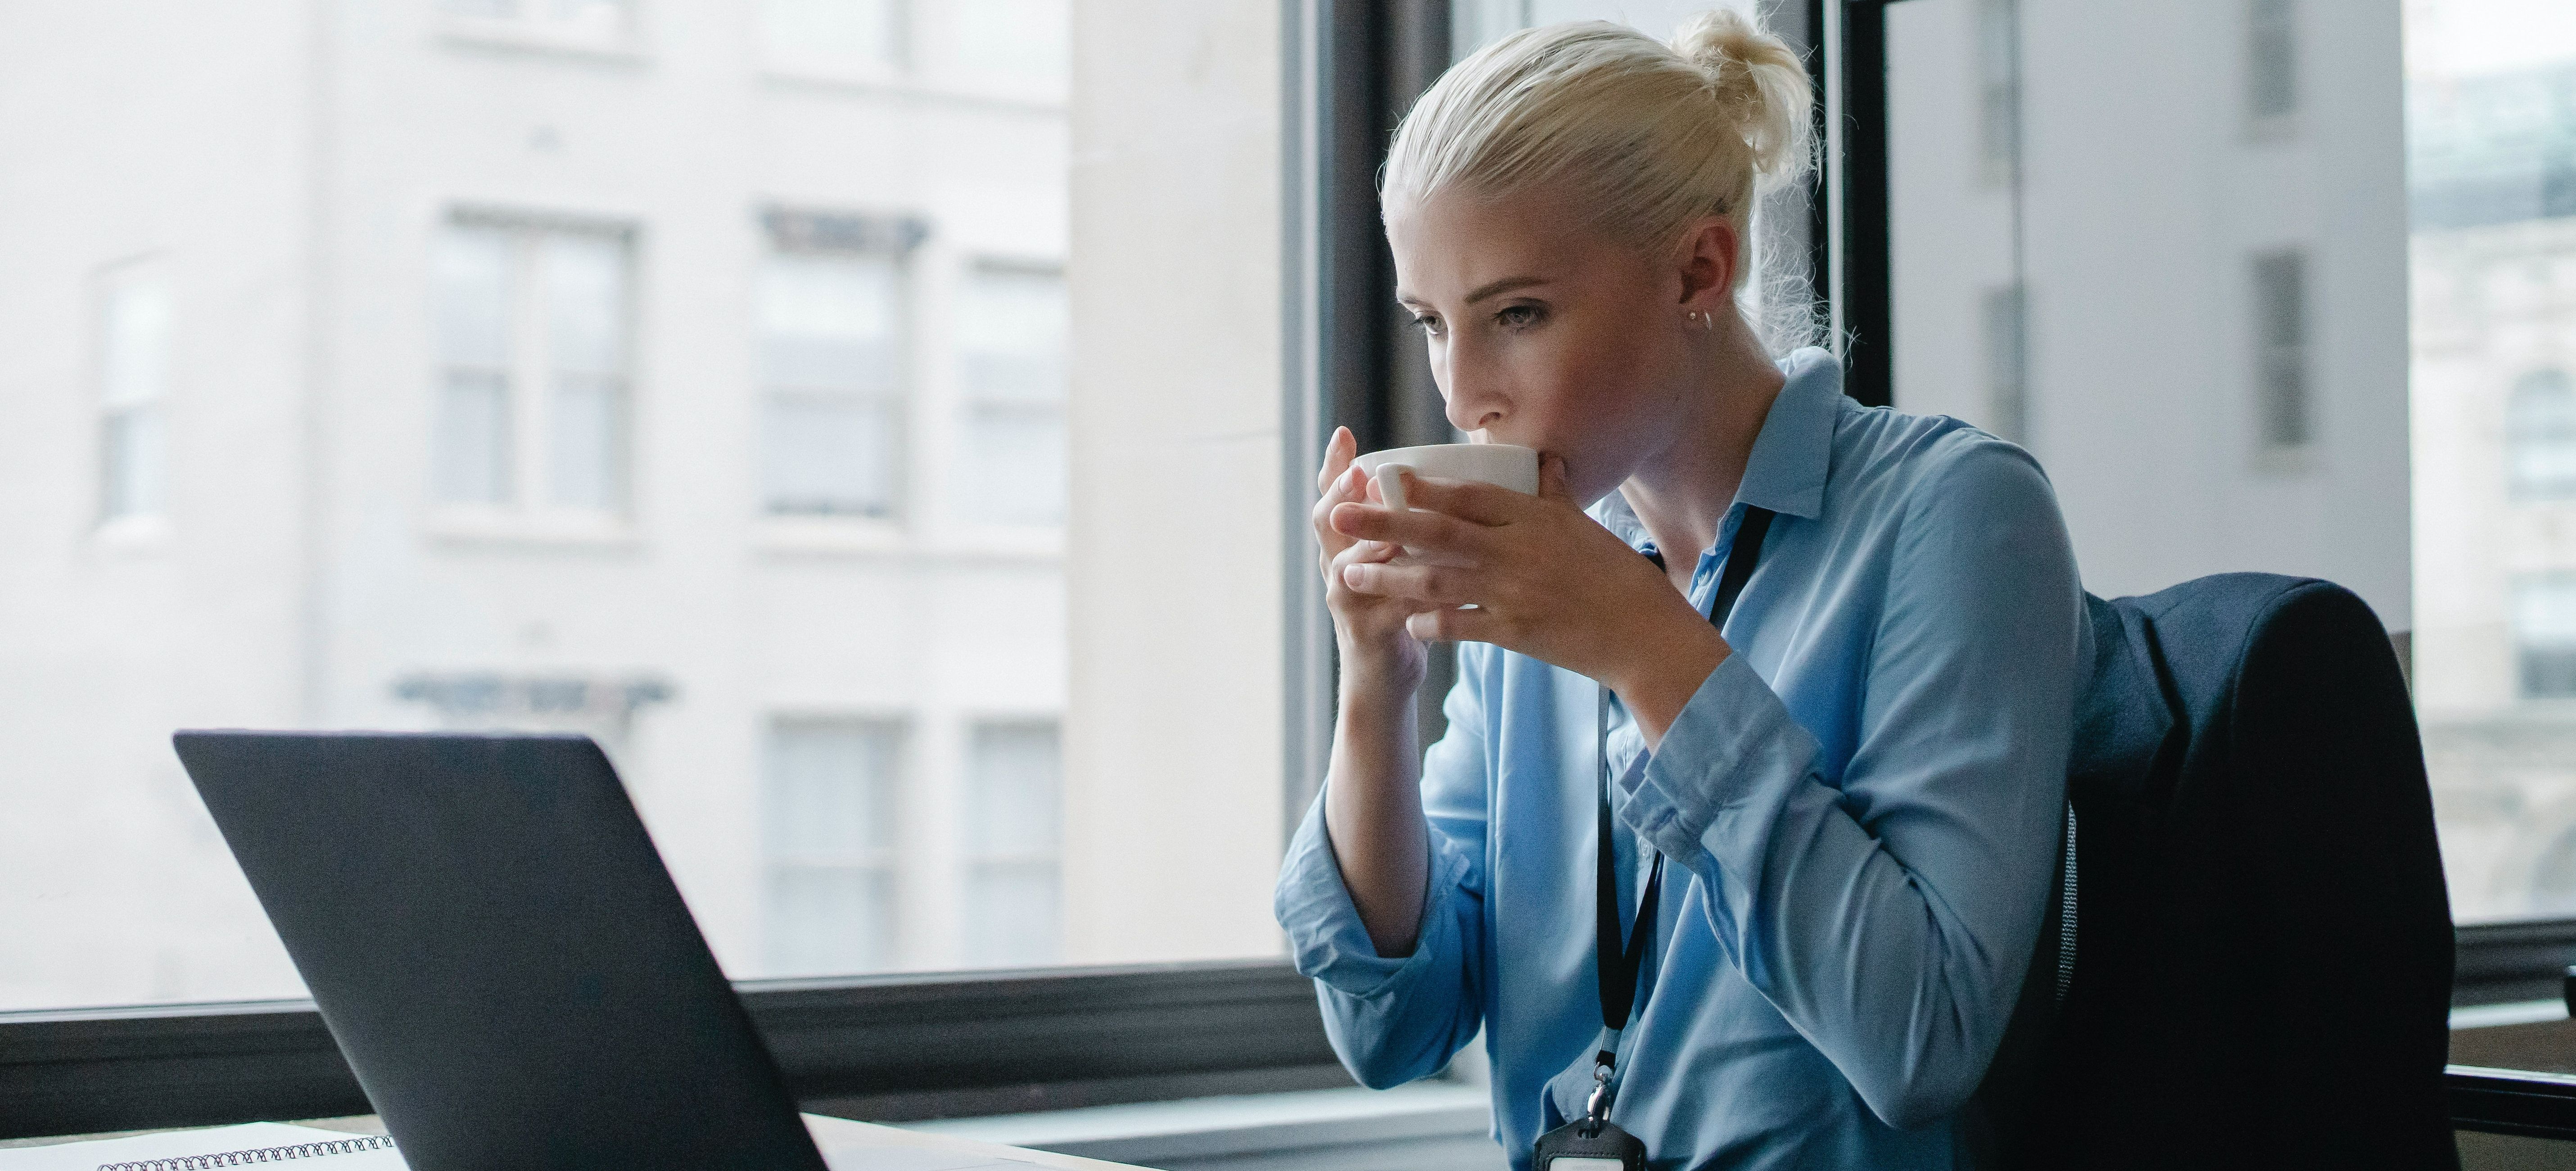 Woman drinking coffee and looking into computer screen